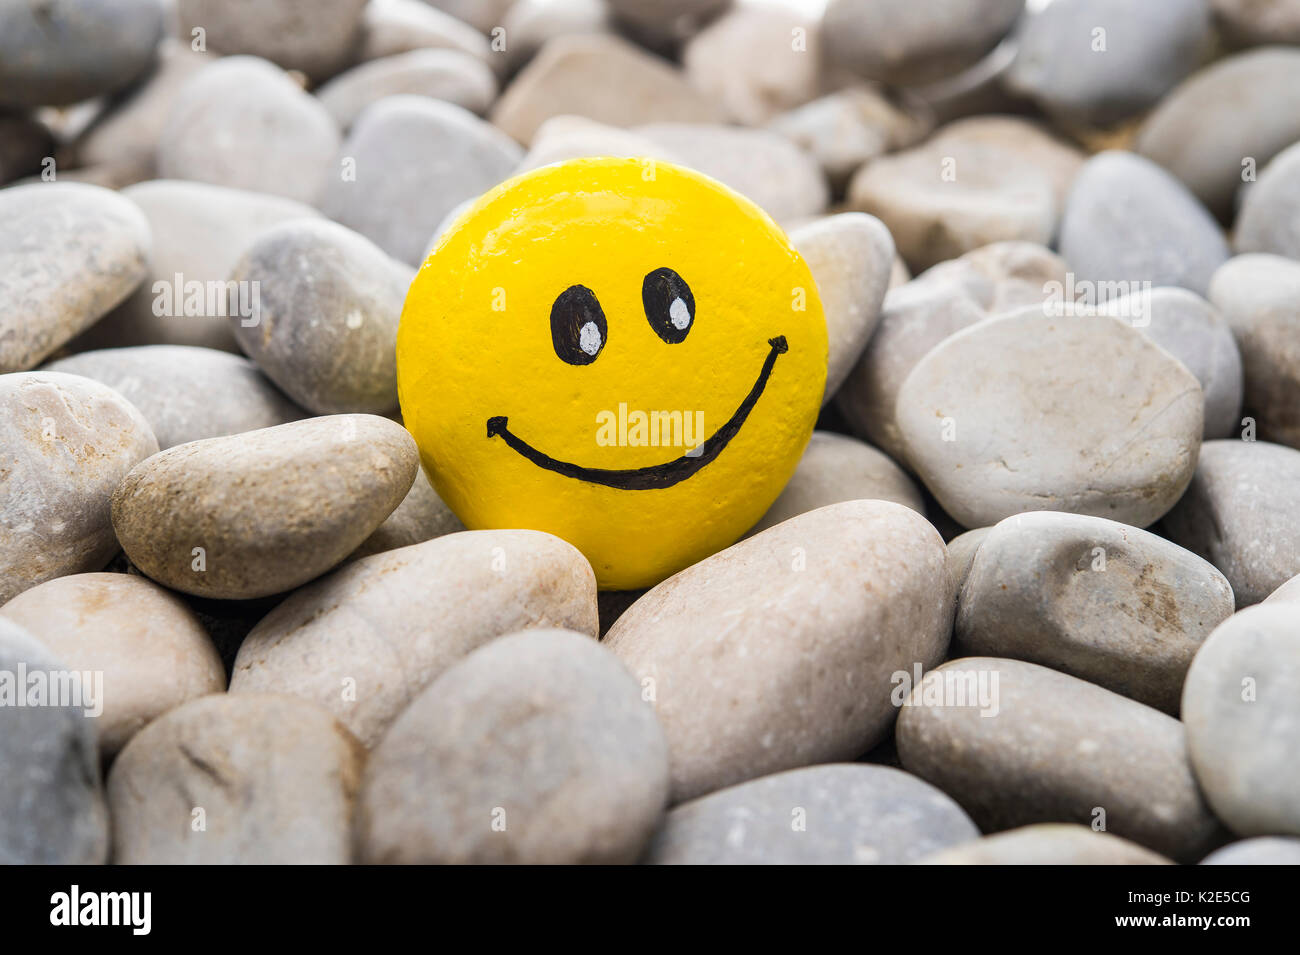 Smiley face made of stone, painted yellow, laughing, lies in between stones Stock Photo